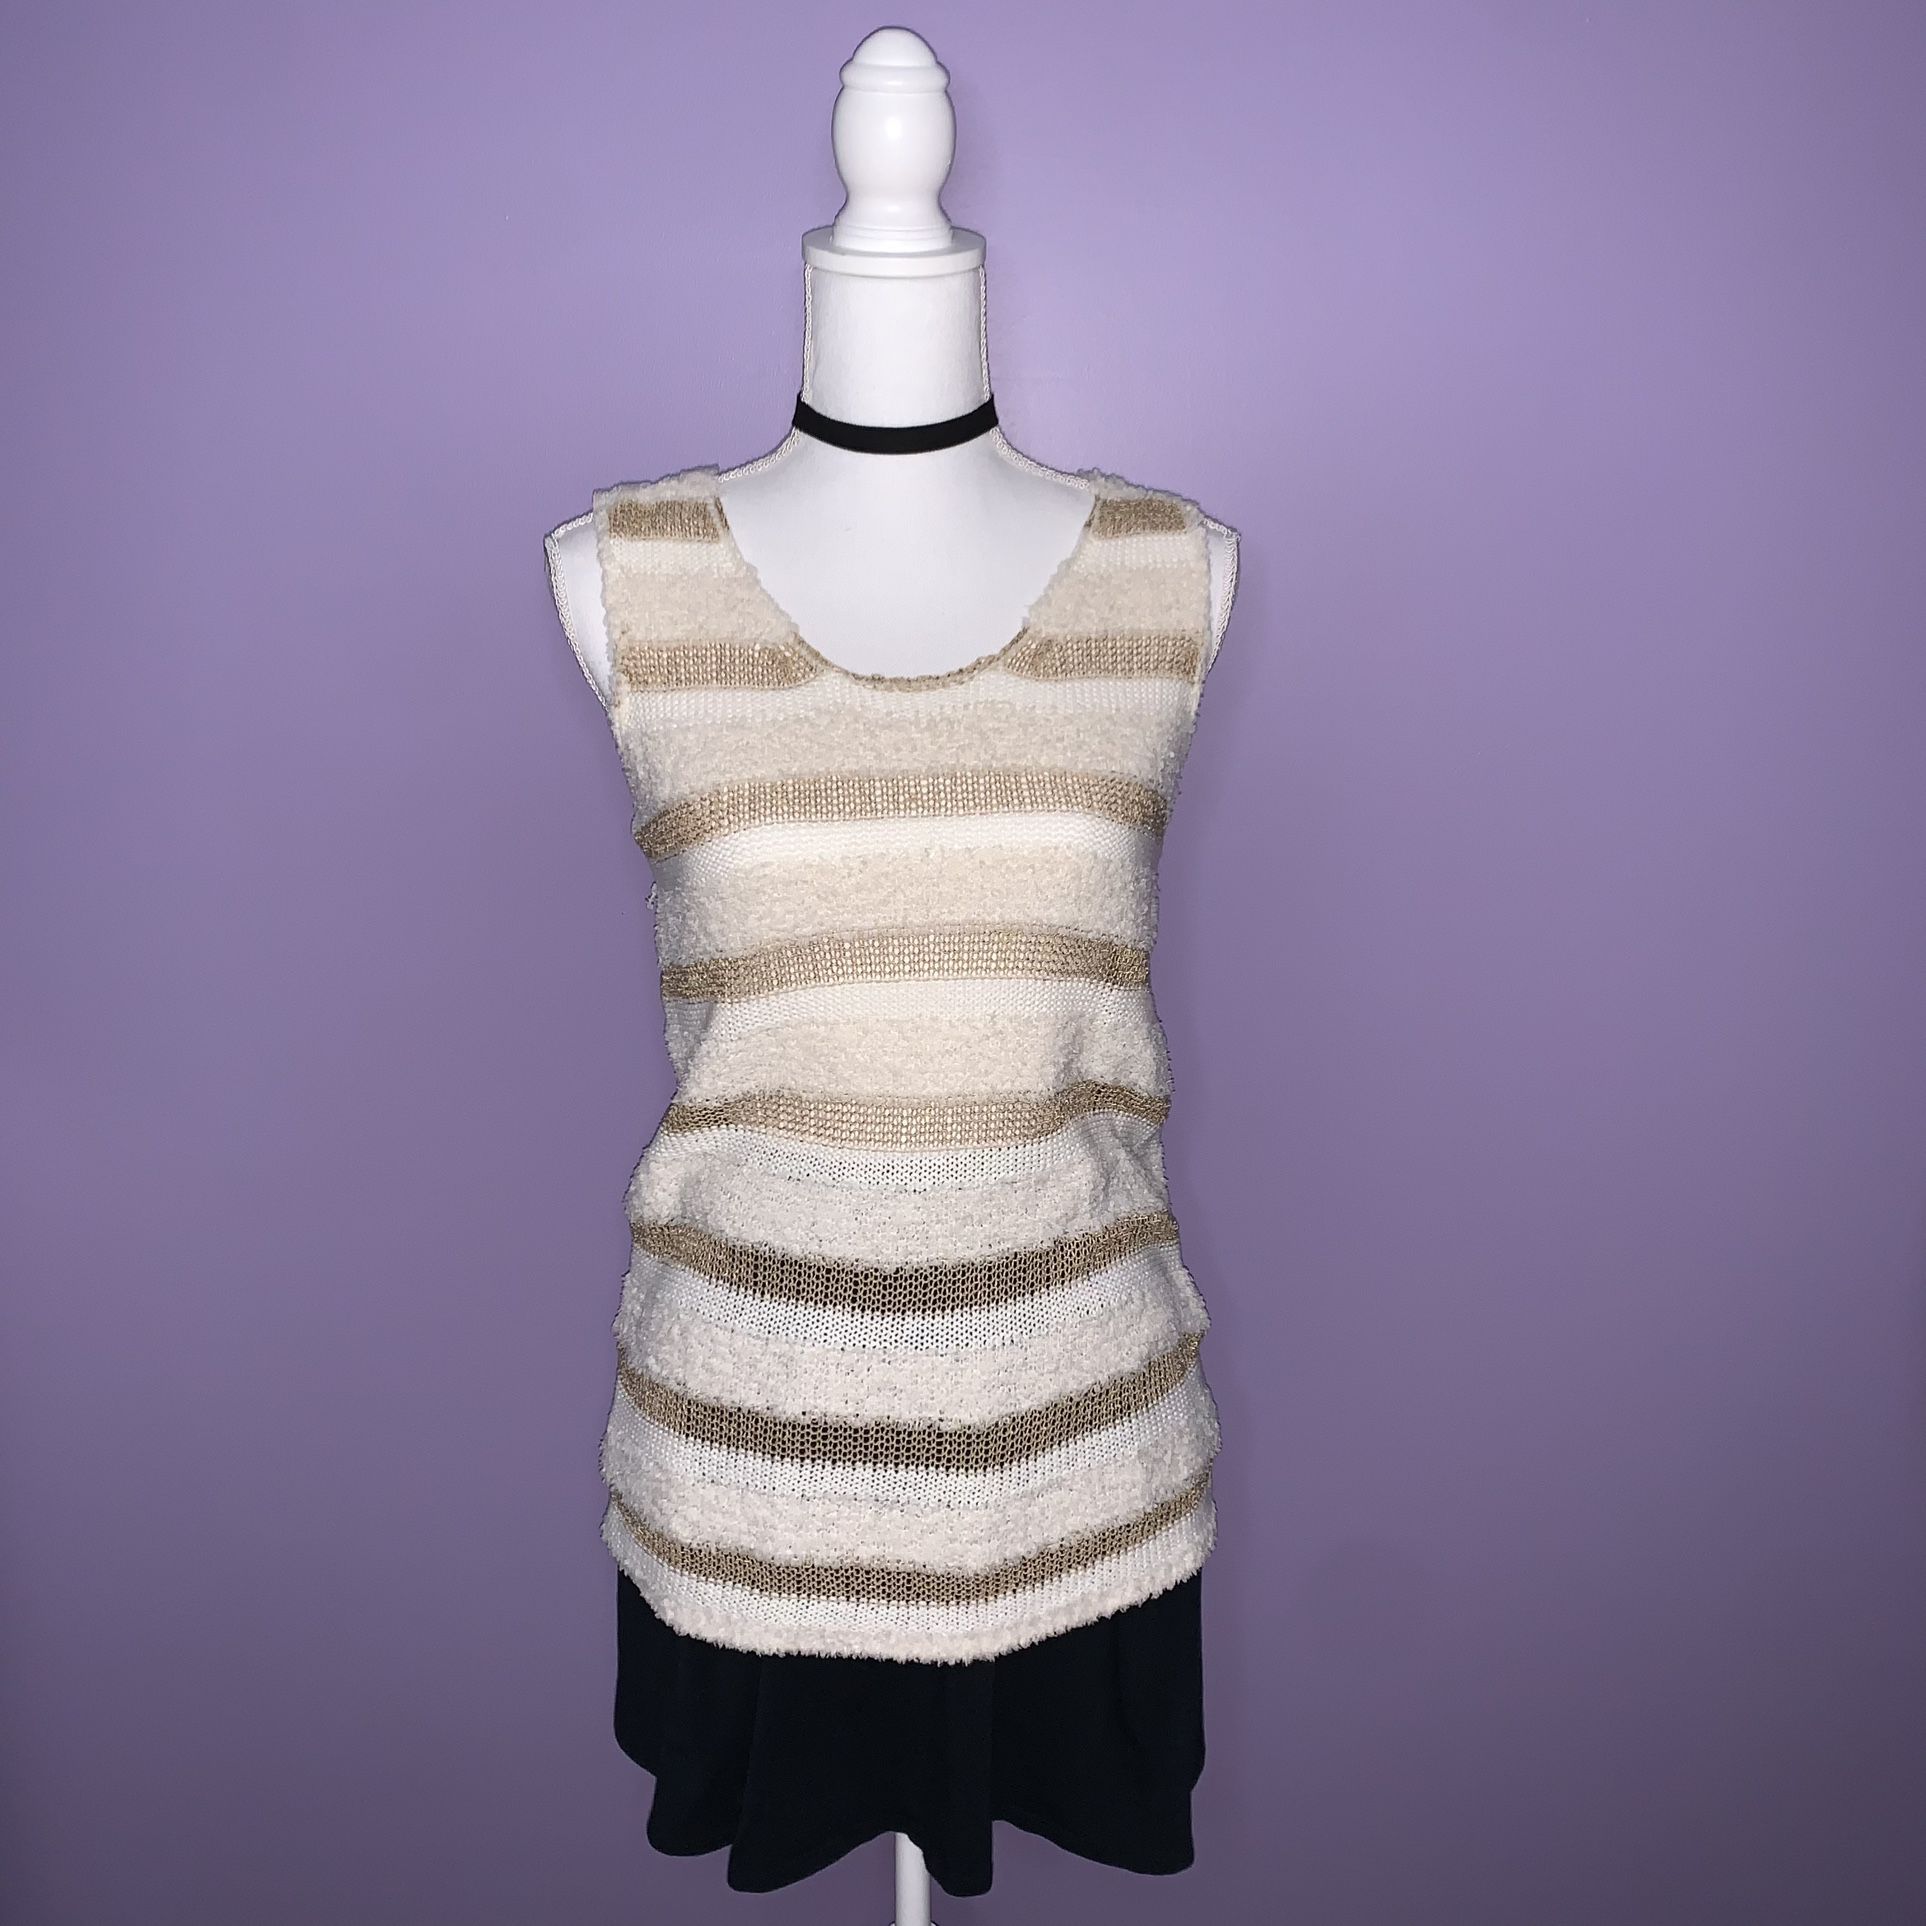 NWT Boutique White and Tan Knit Top